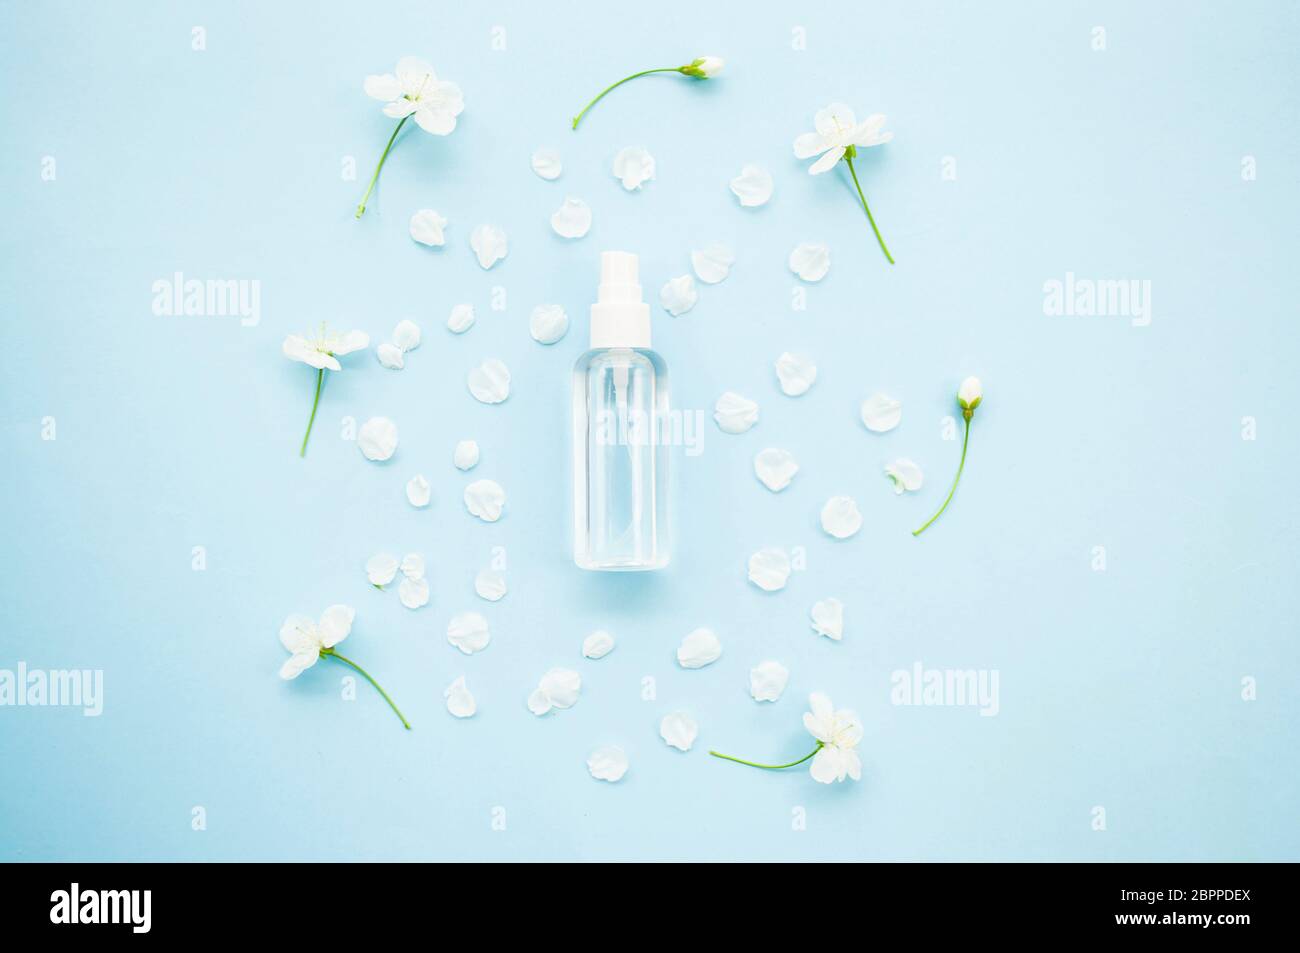 Hand antiseptic in spray bottle and beatiful blooming cherry tree flowers and fresh green leaves on blue background. Stop coronavirus concept. Stock Photo